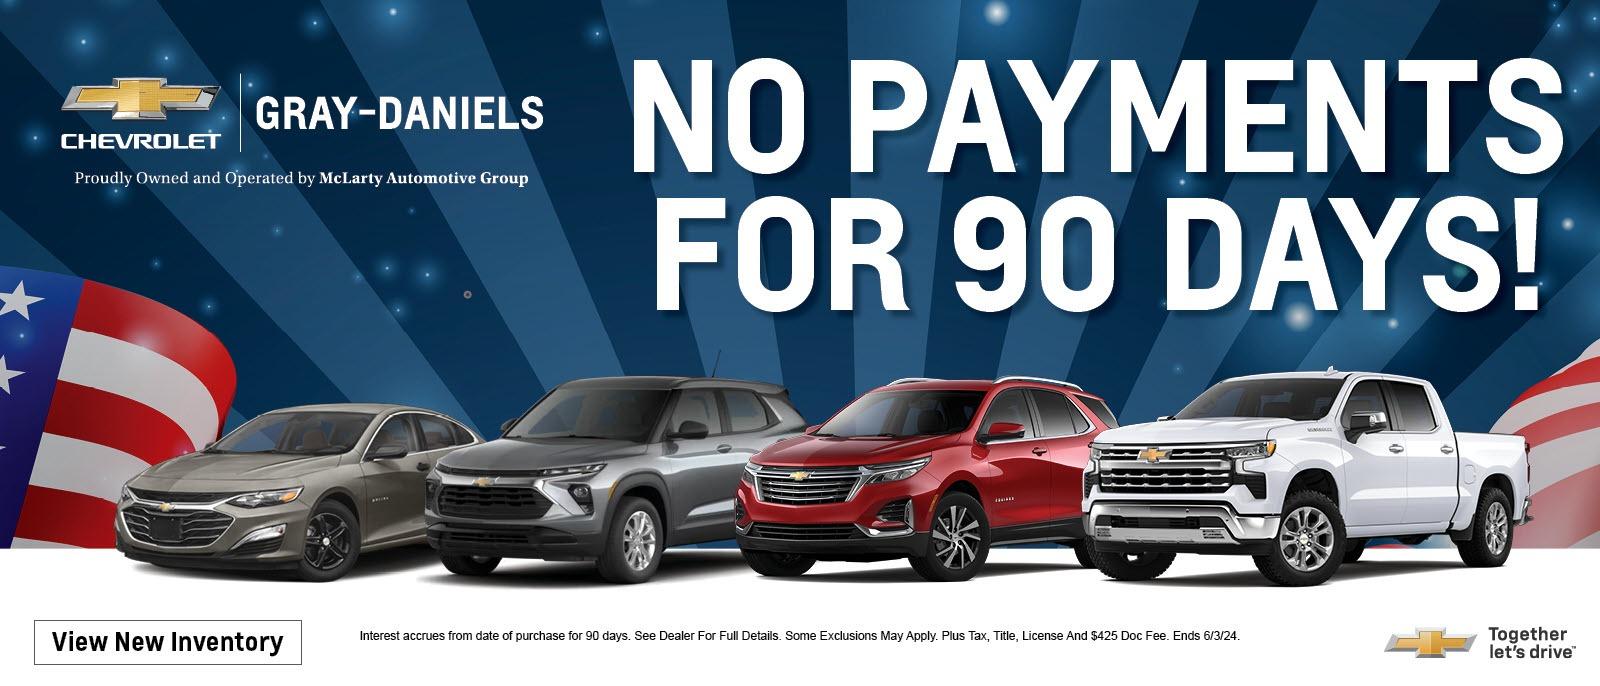 No payments for 90 days!